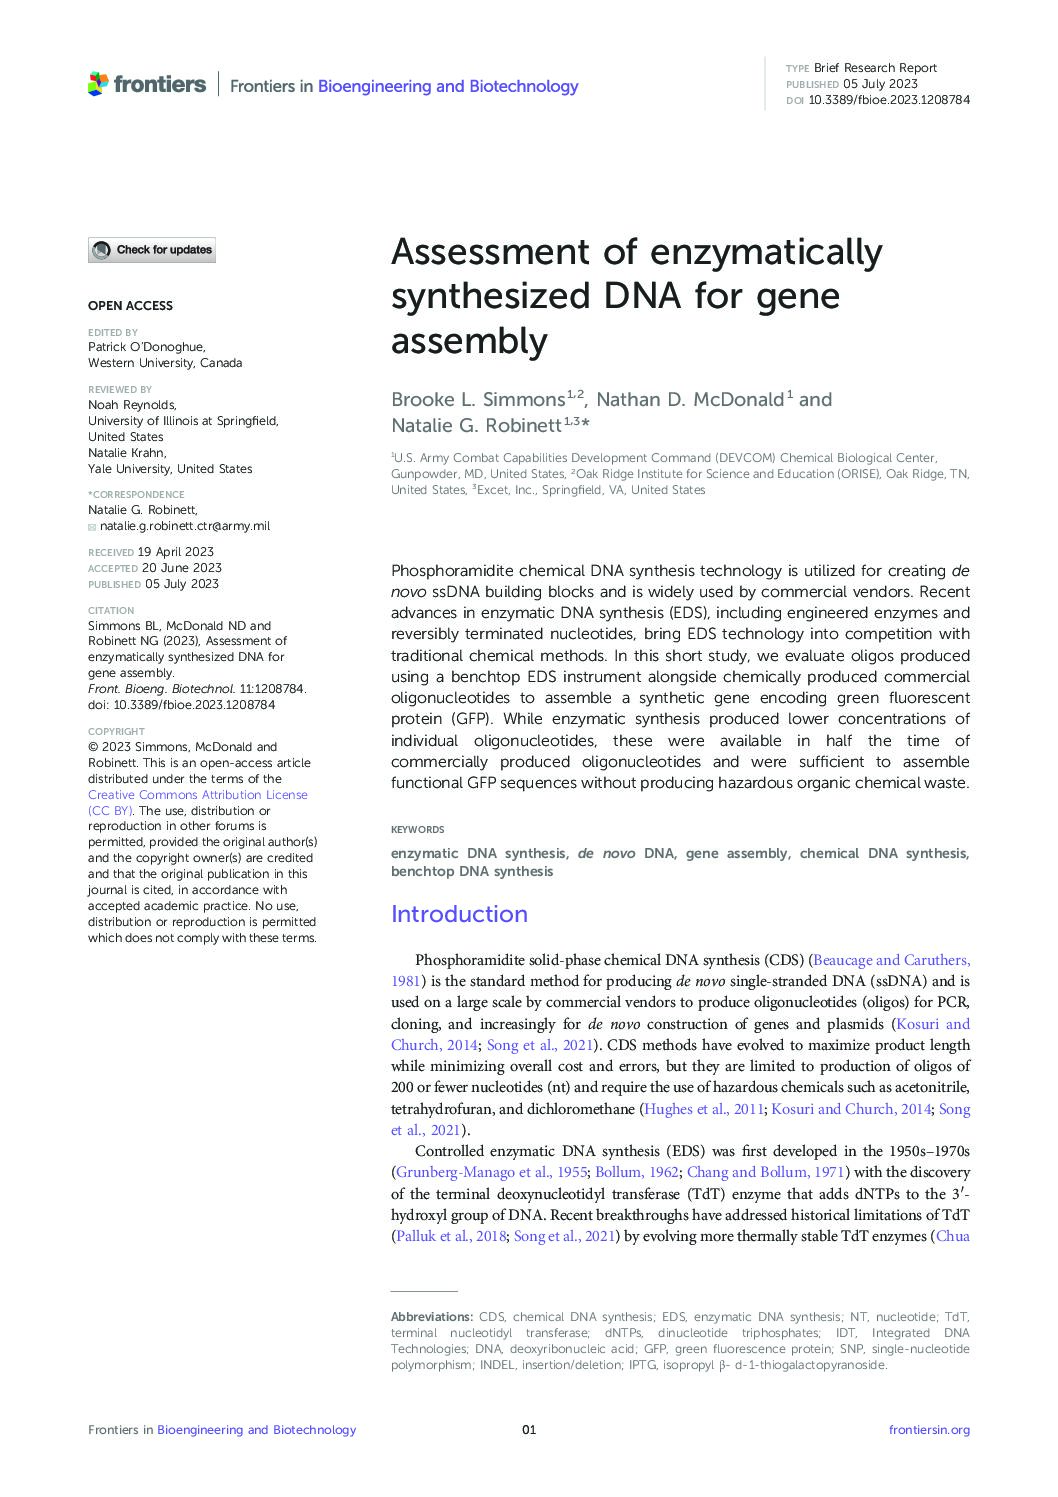 Assessment of enzymatically synthesized DNA for gene assembly